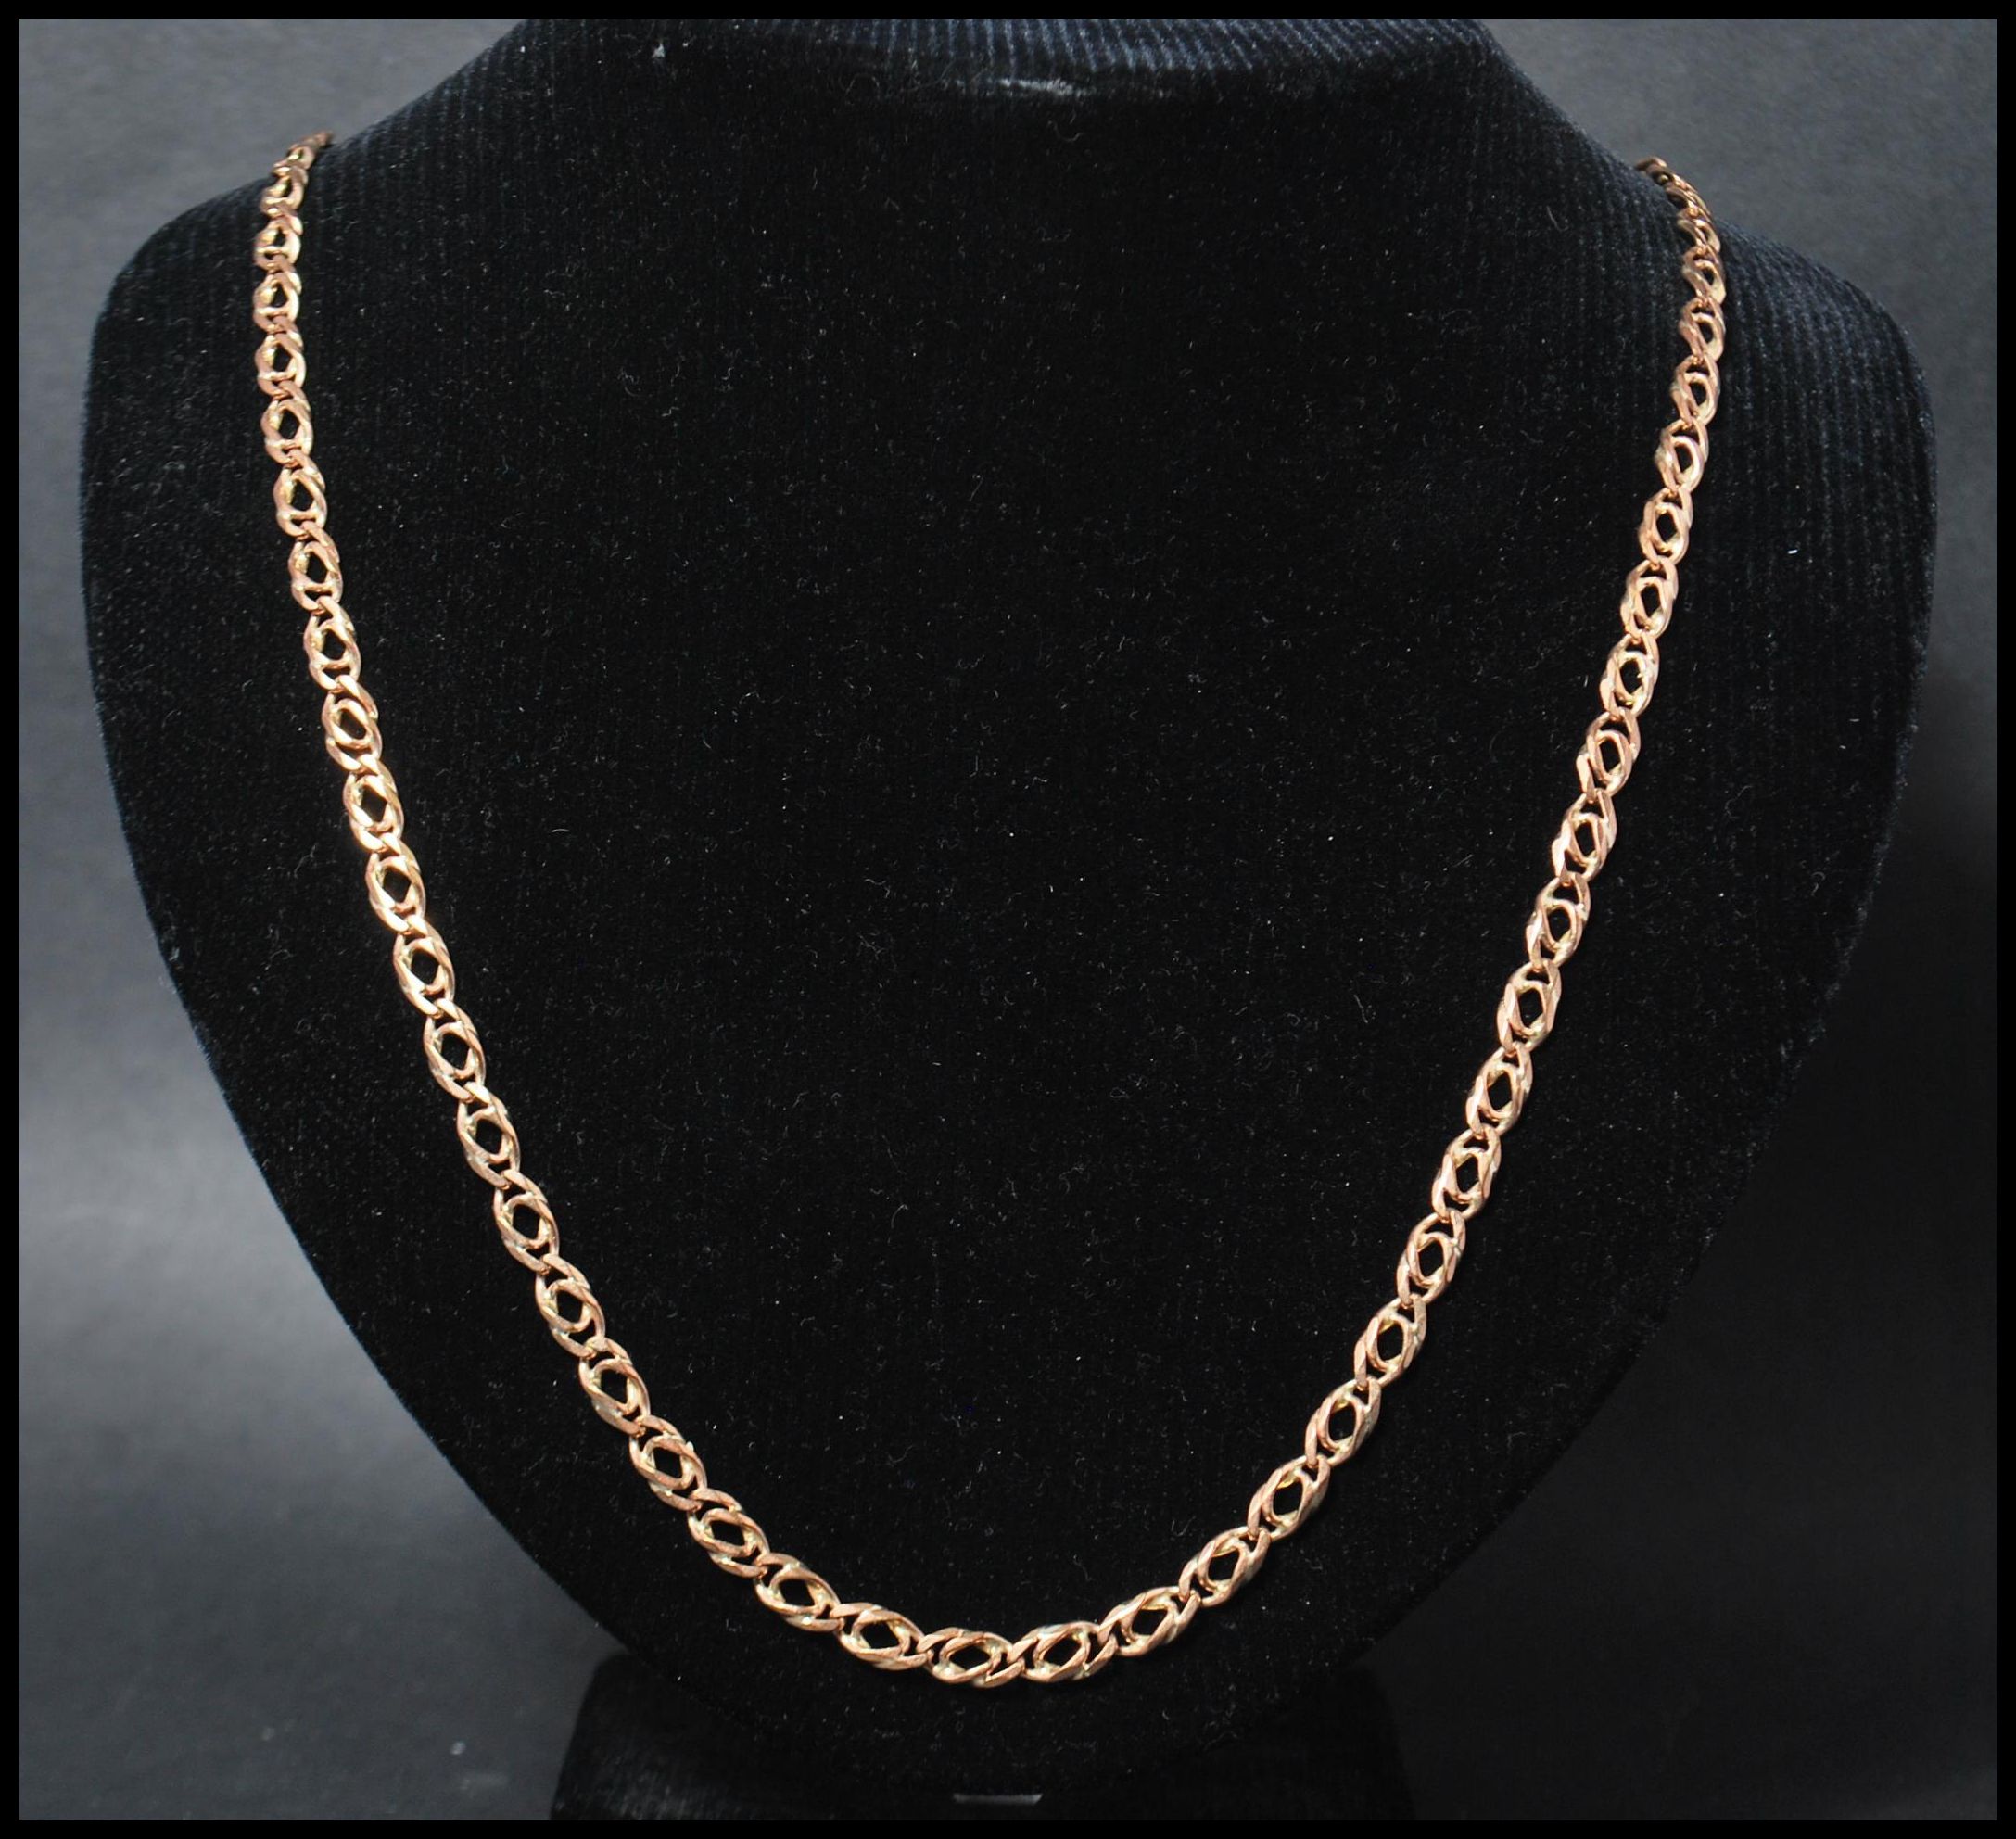 A 9ct gold 375 stamped double curb link necklace chain having a claw clasp. Measures 28 inches